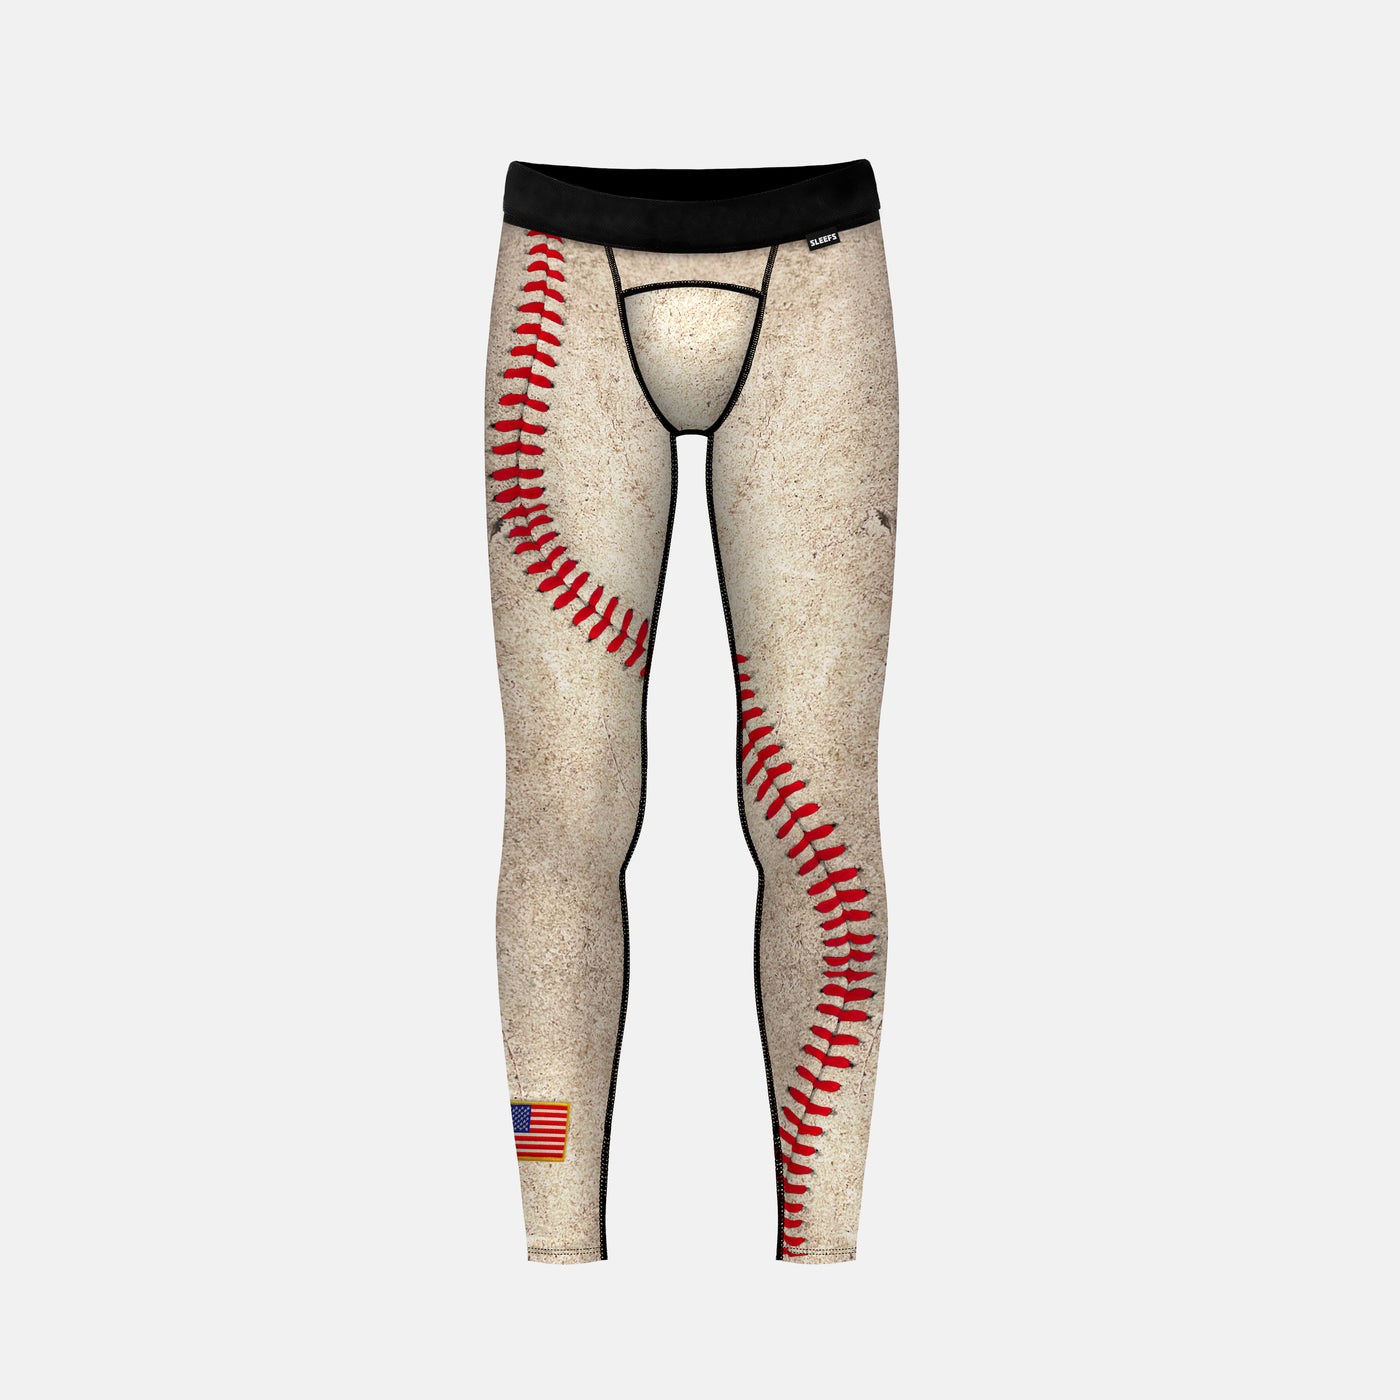 Old Baseball Tights for kids